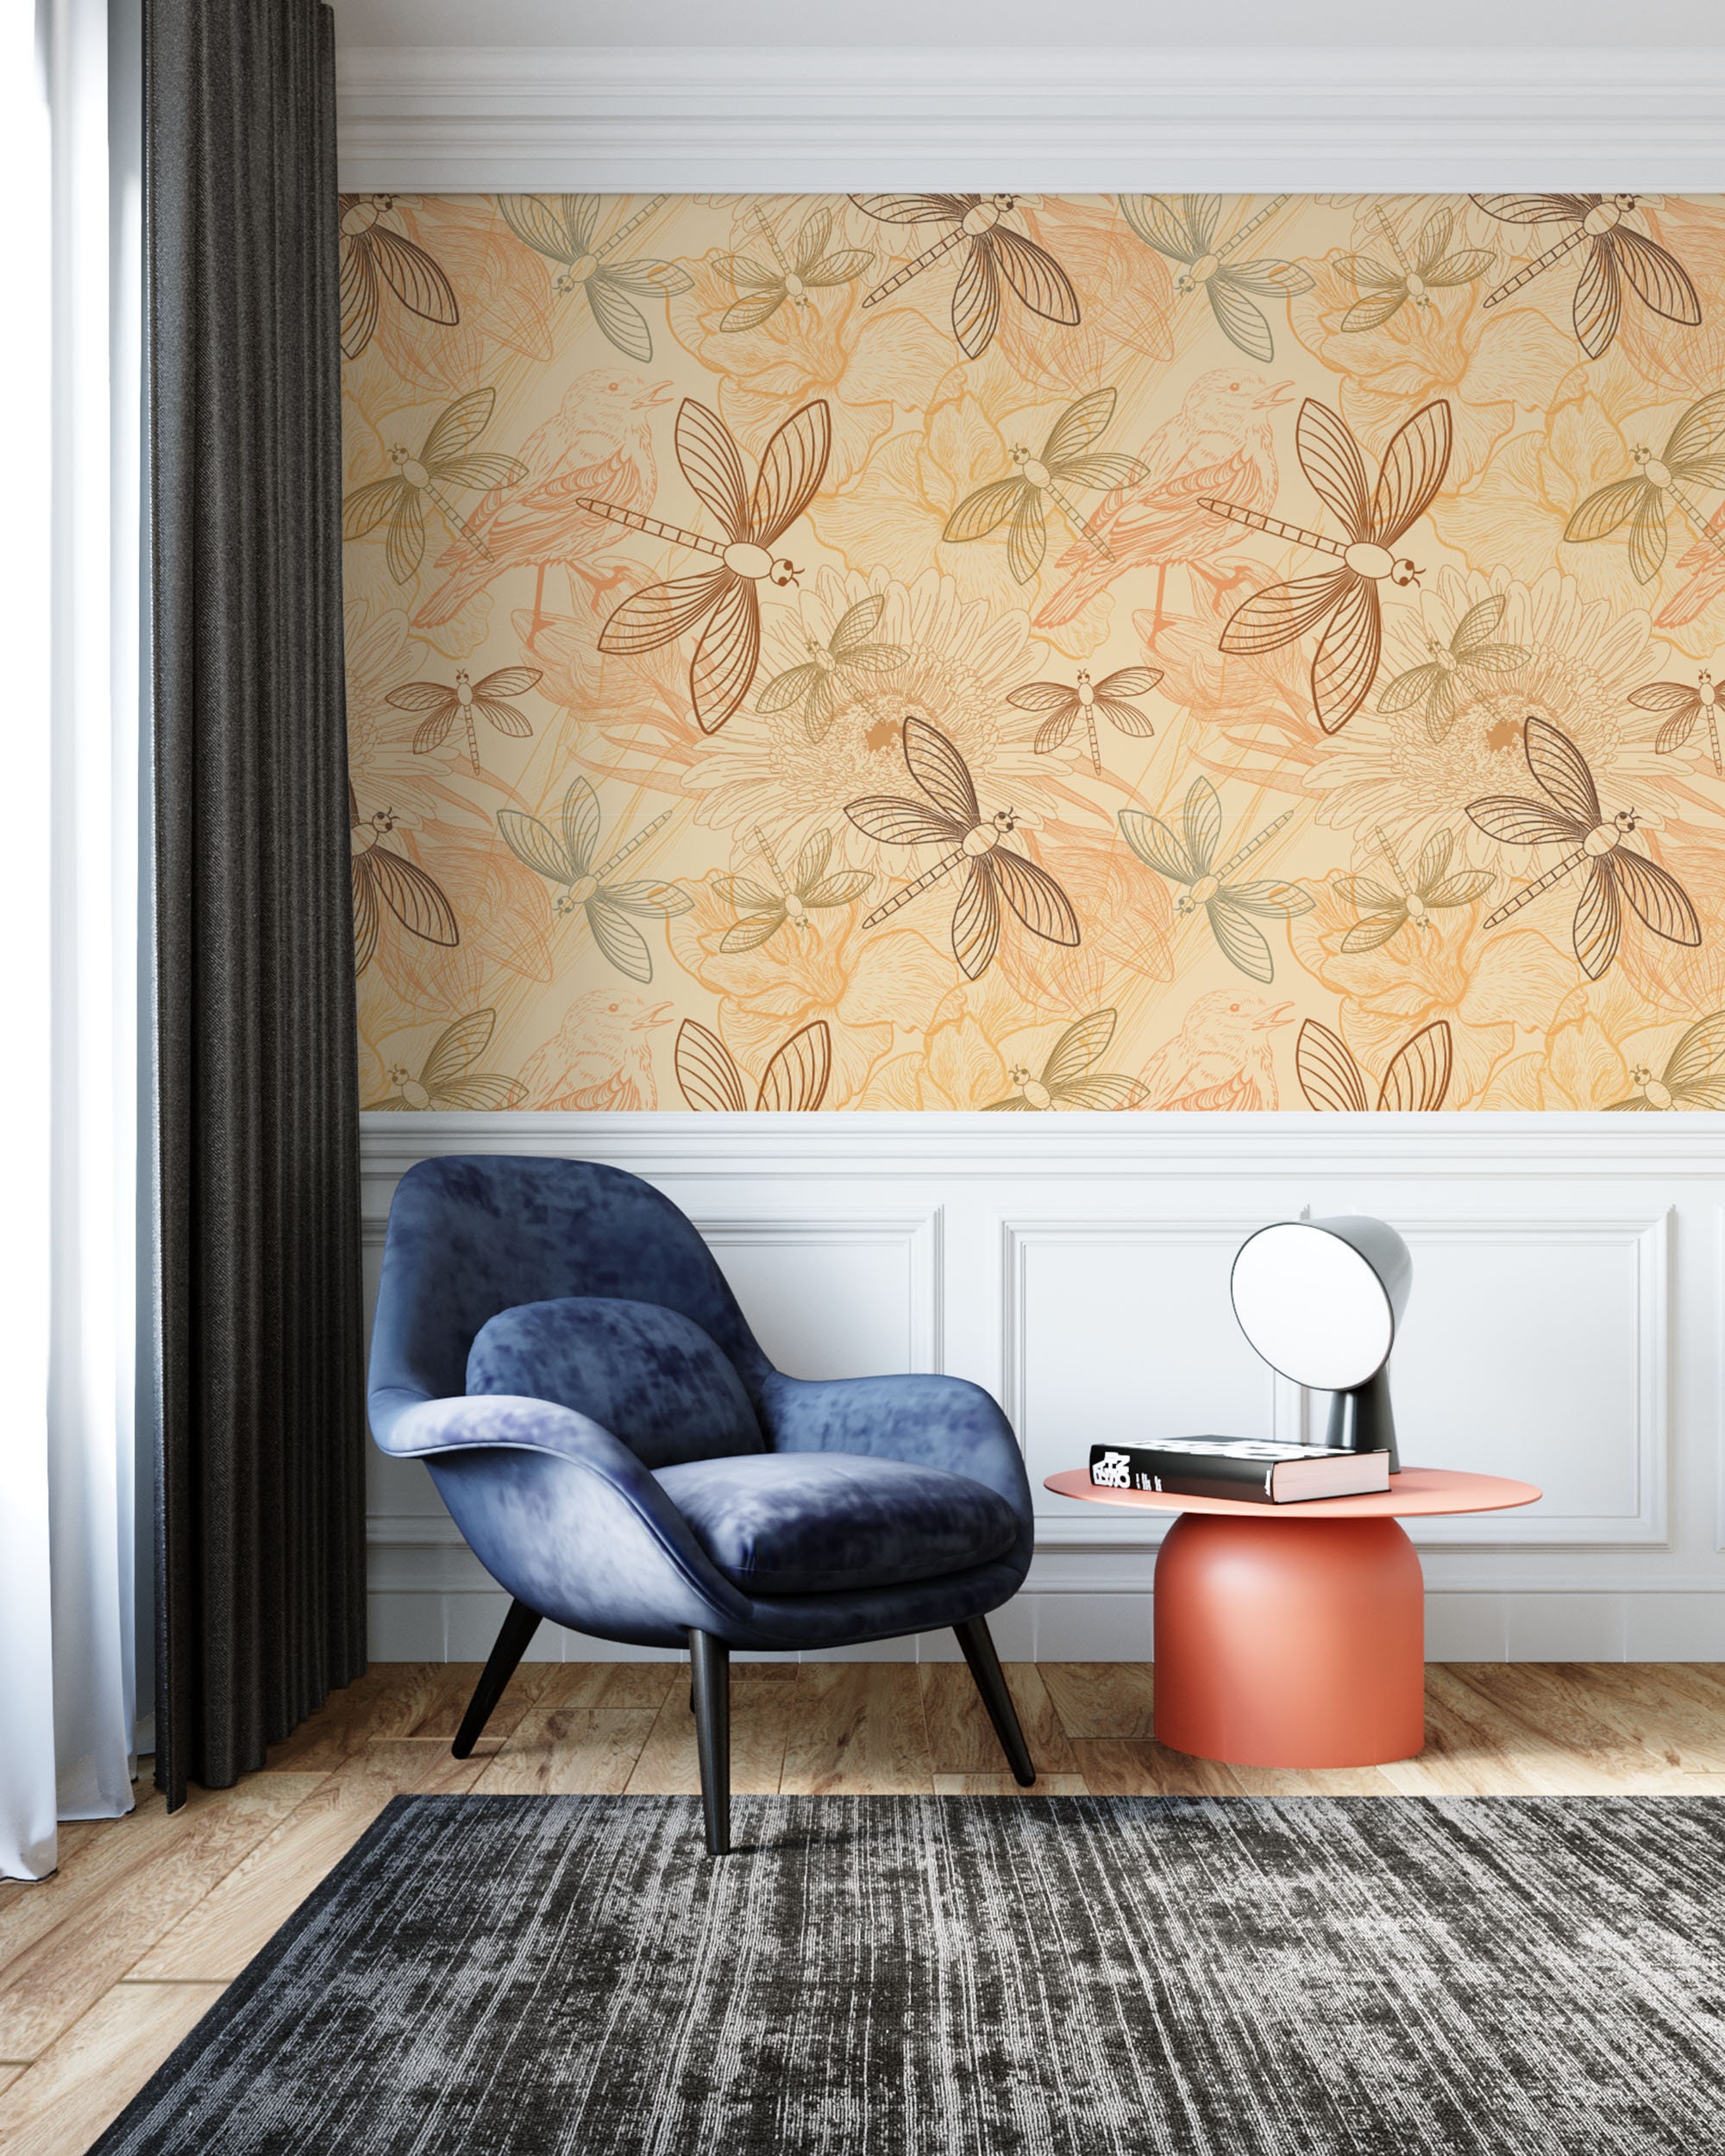 French country chic Wallpaper by Nouveau Design  Society6